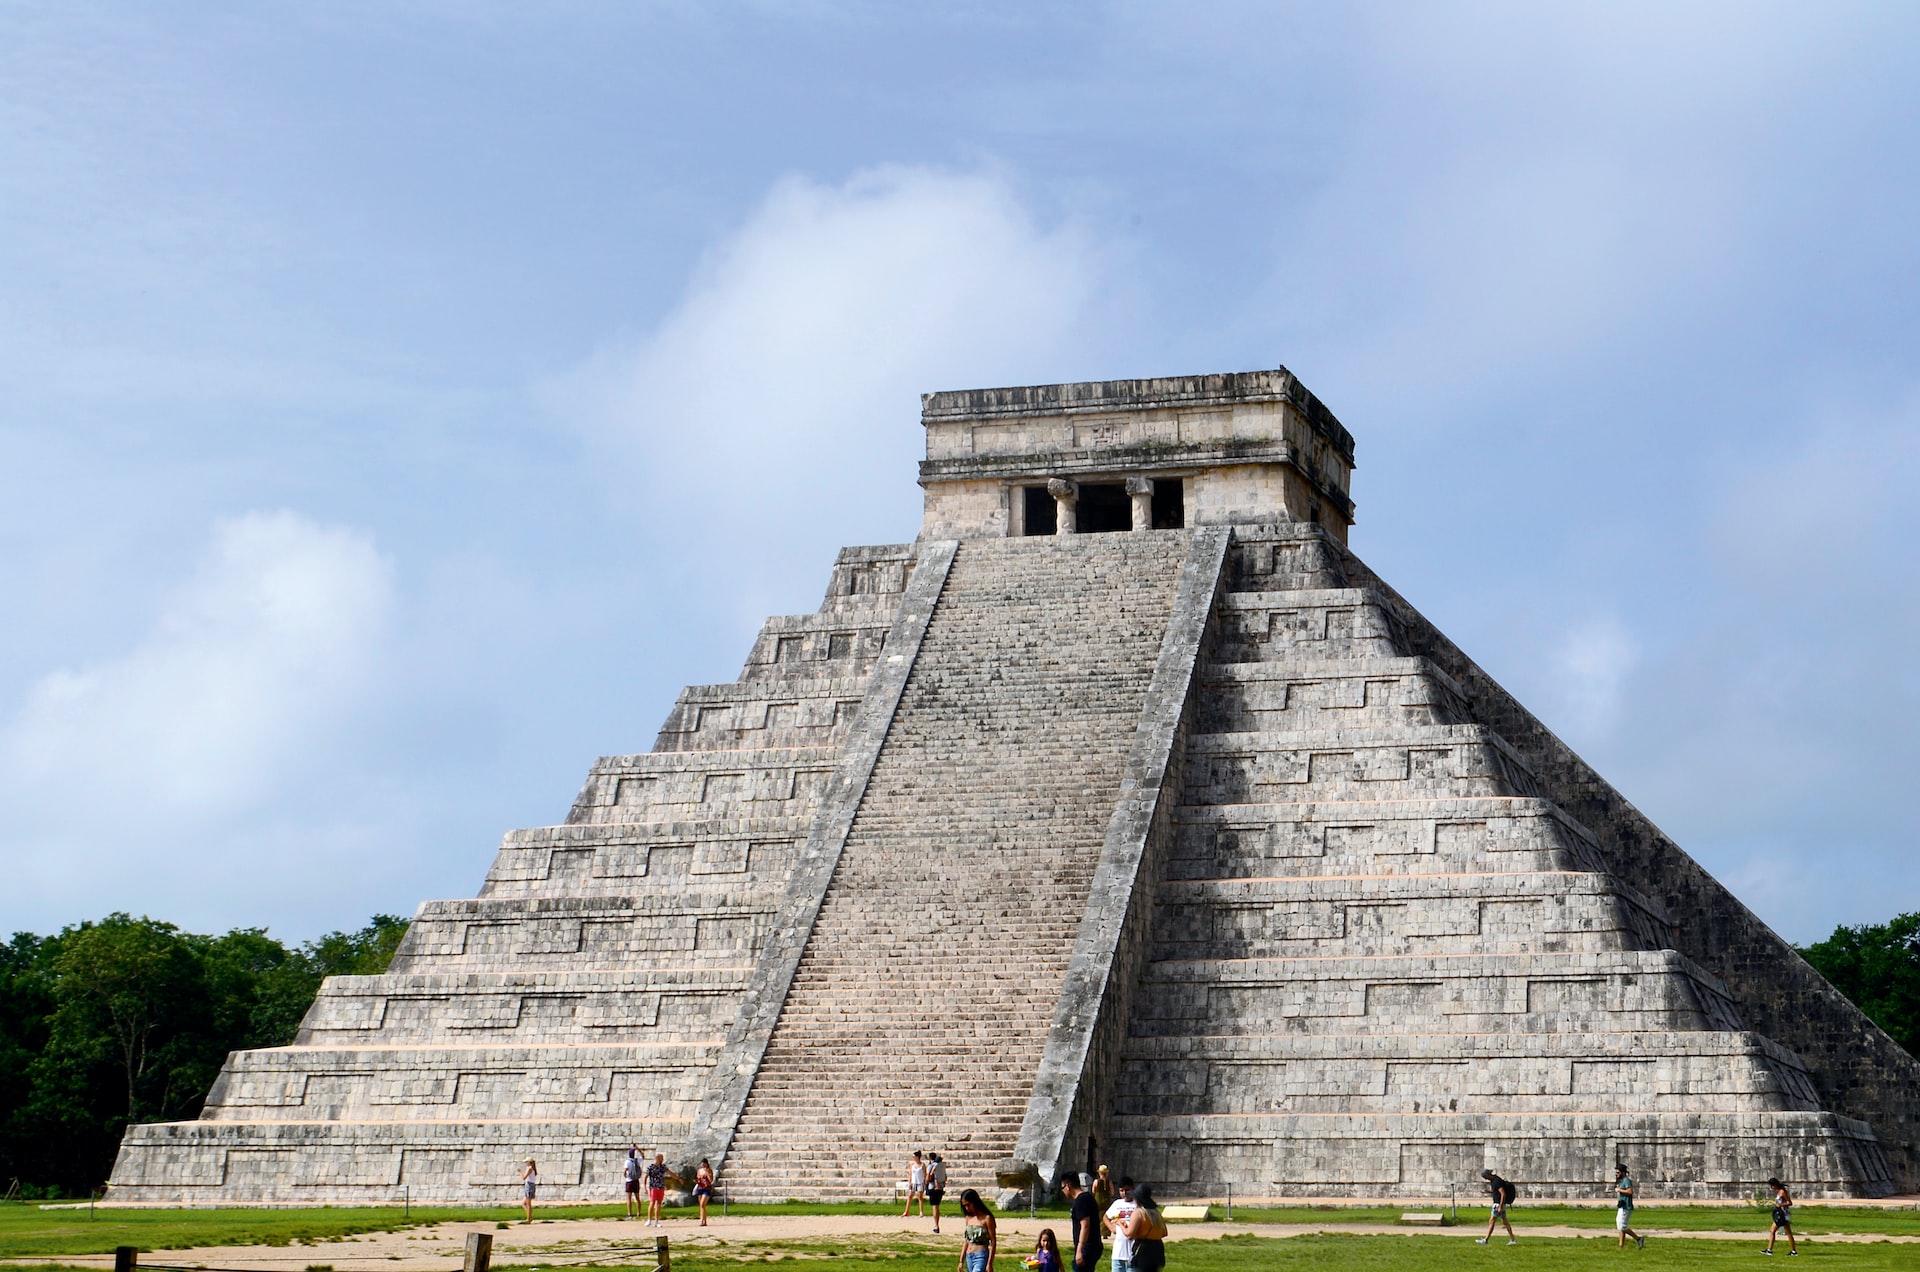 one of the top 9 things to do in mexico is visiting the mayan ruins